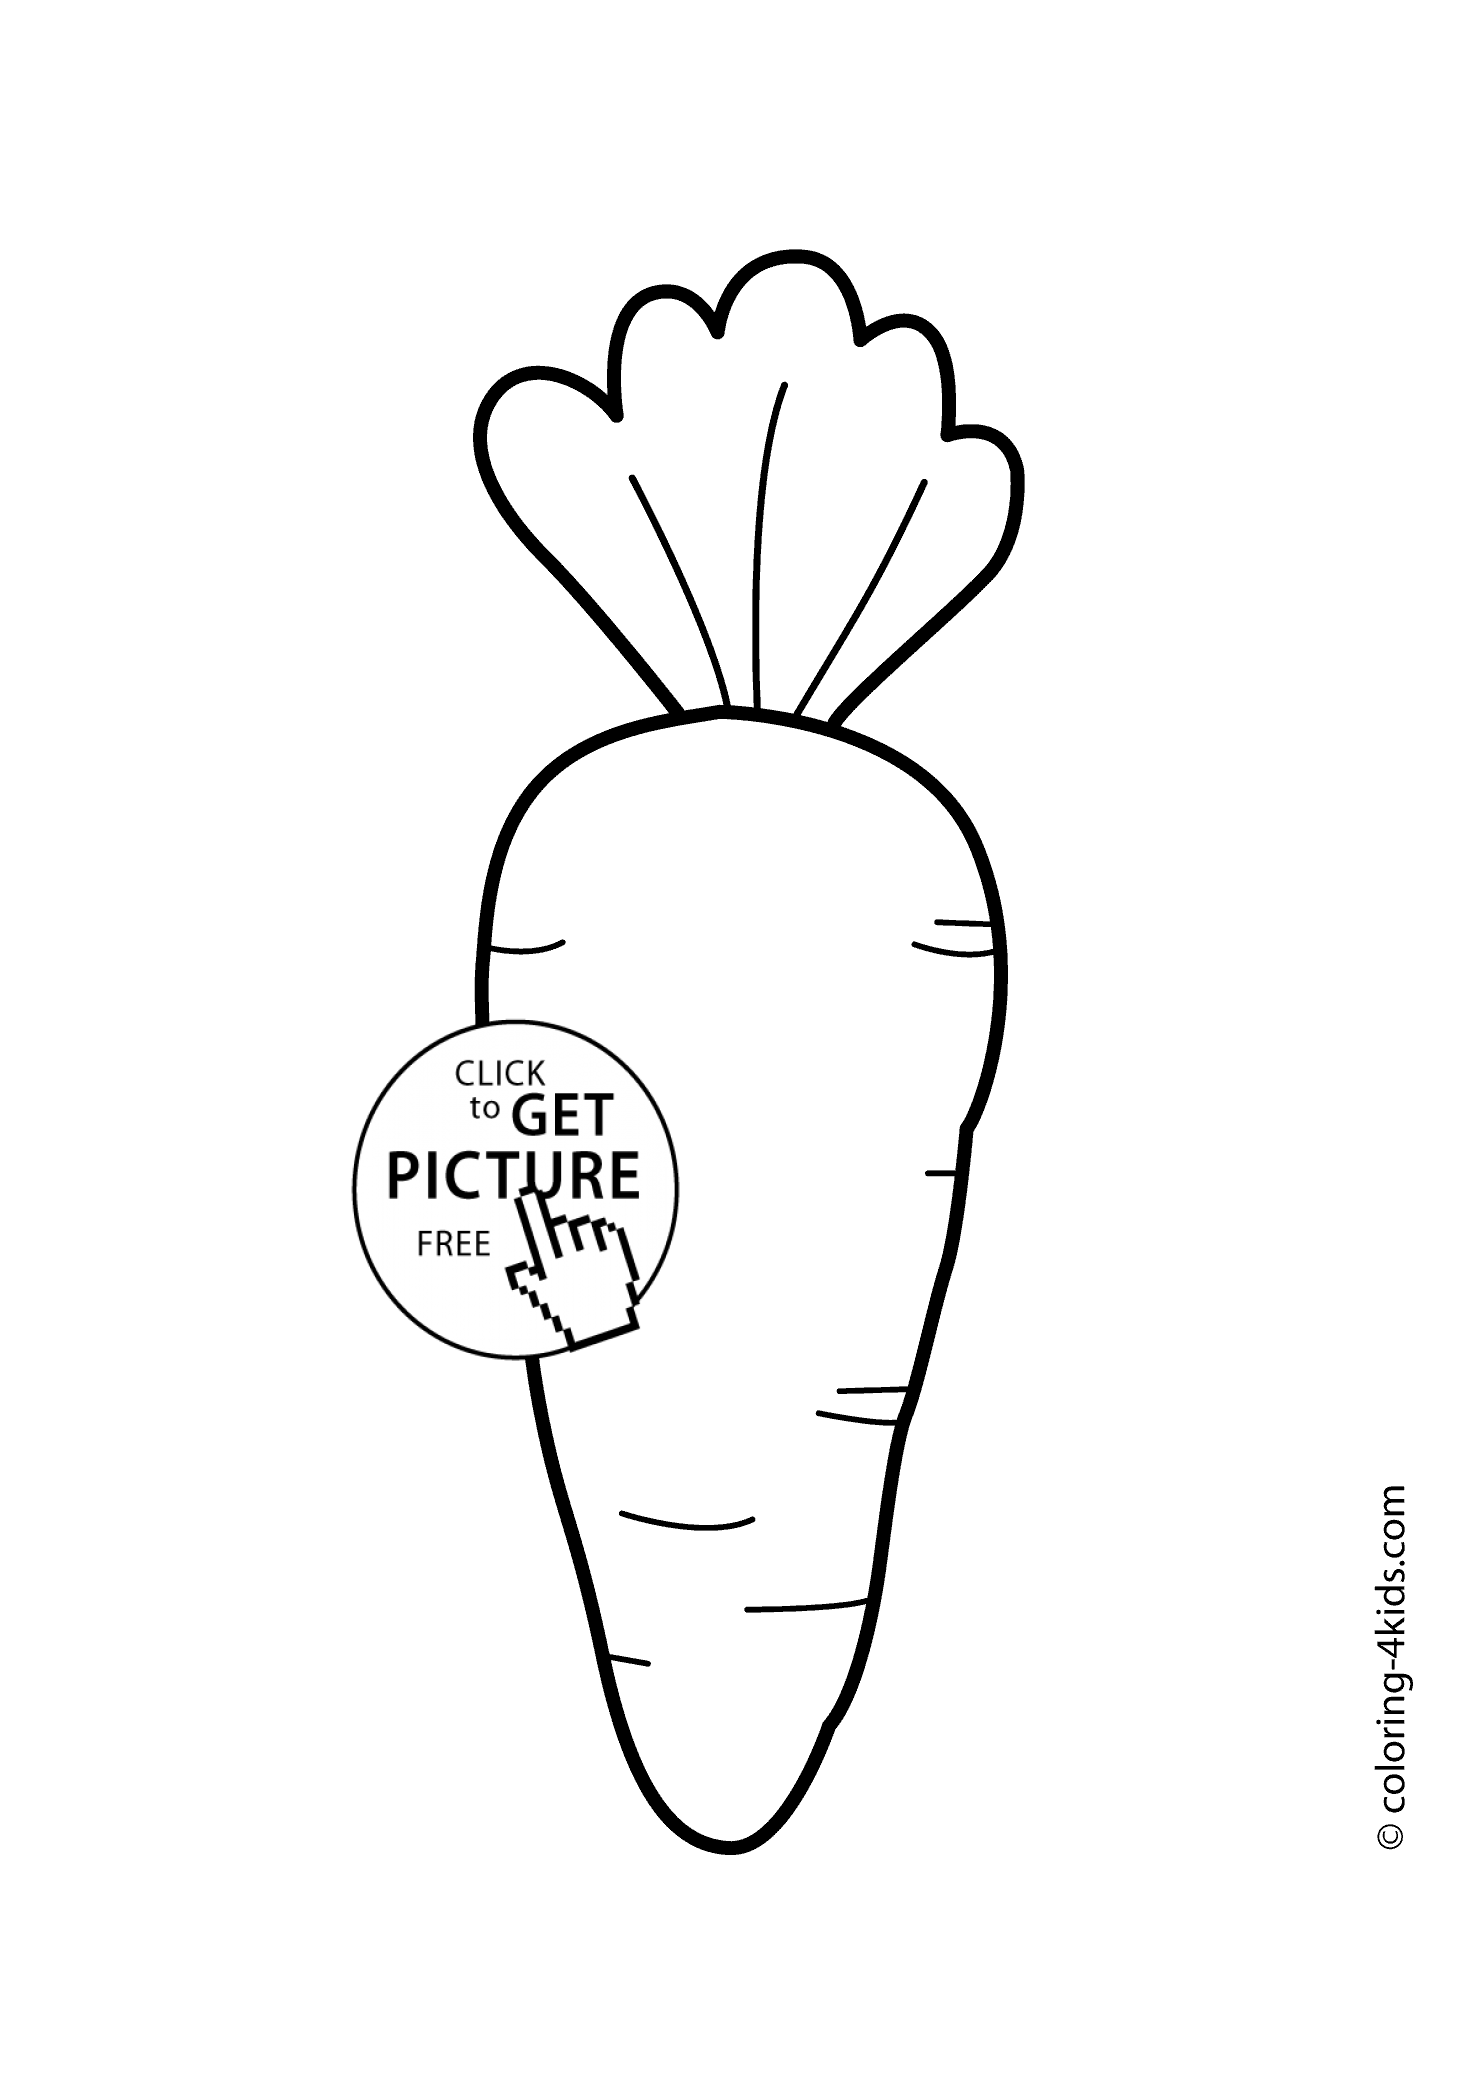 carrot coloring picture carrot 12 coloring page free vegetables coloring pages carrot picture coloring 